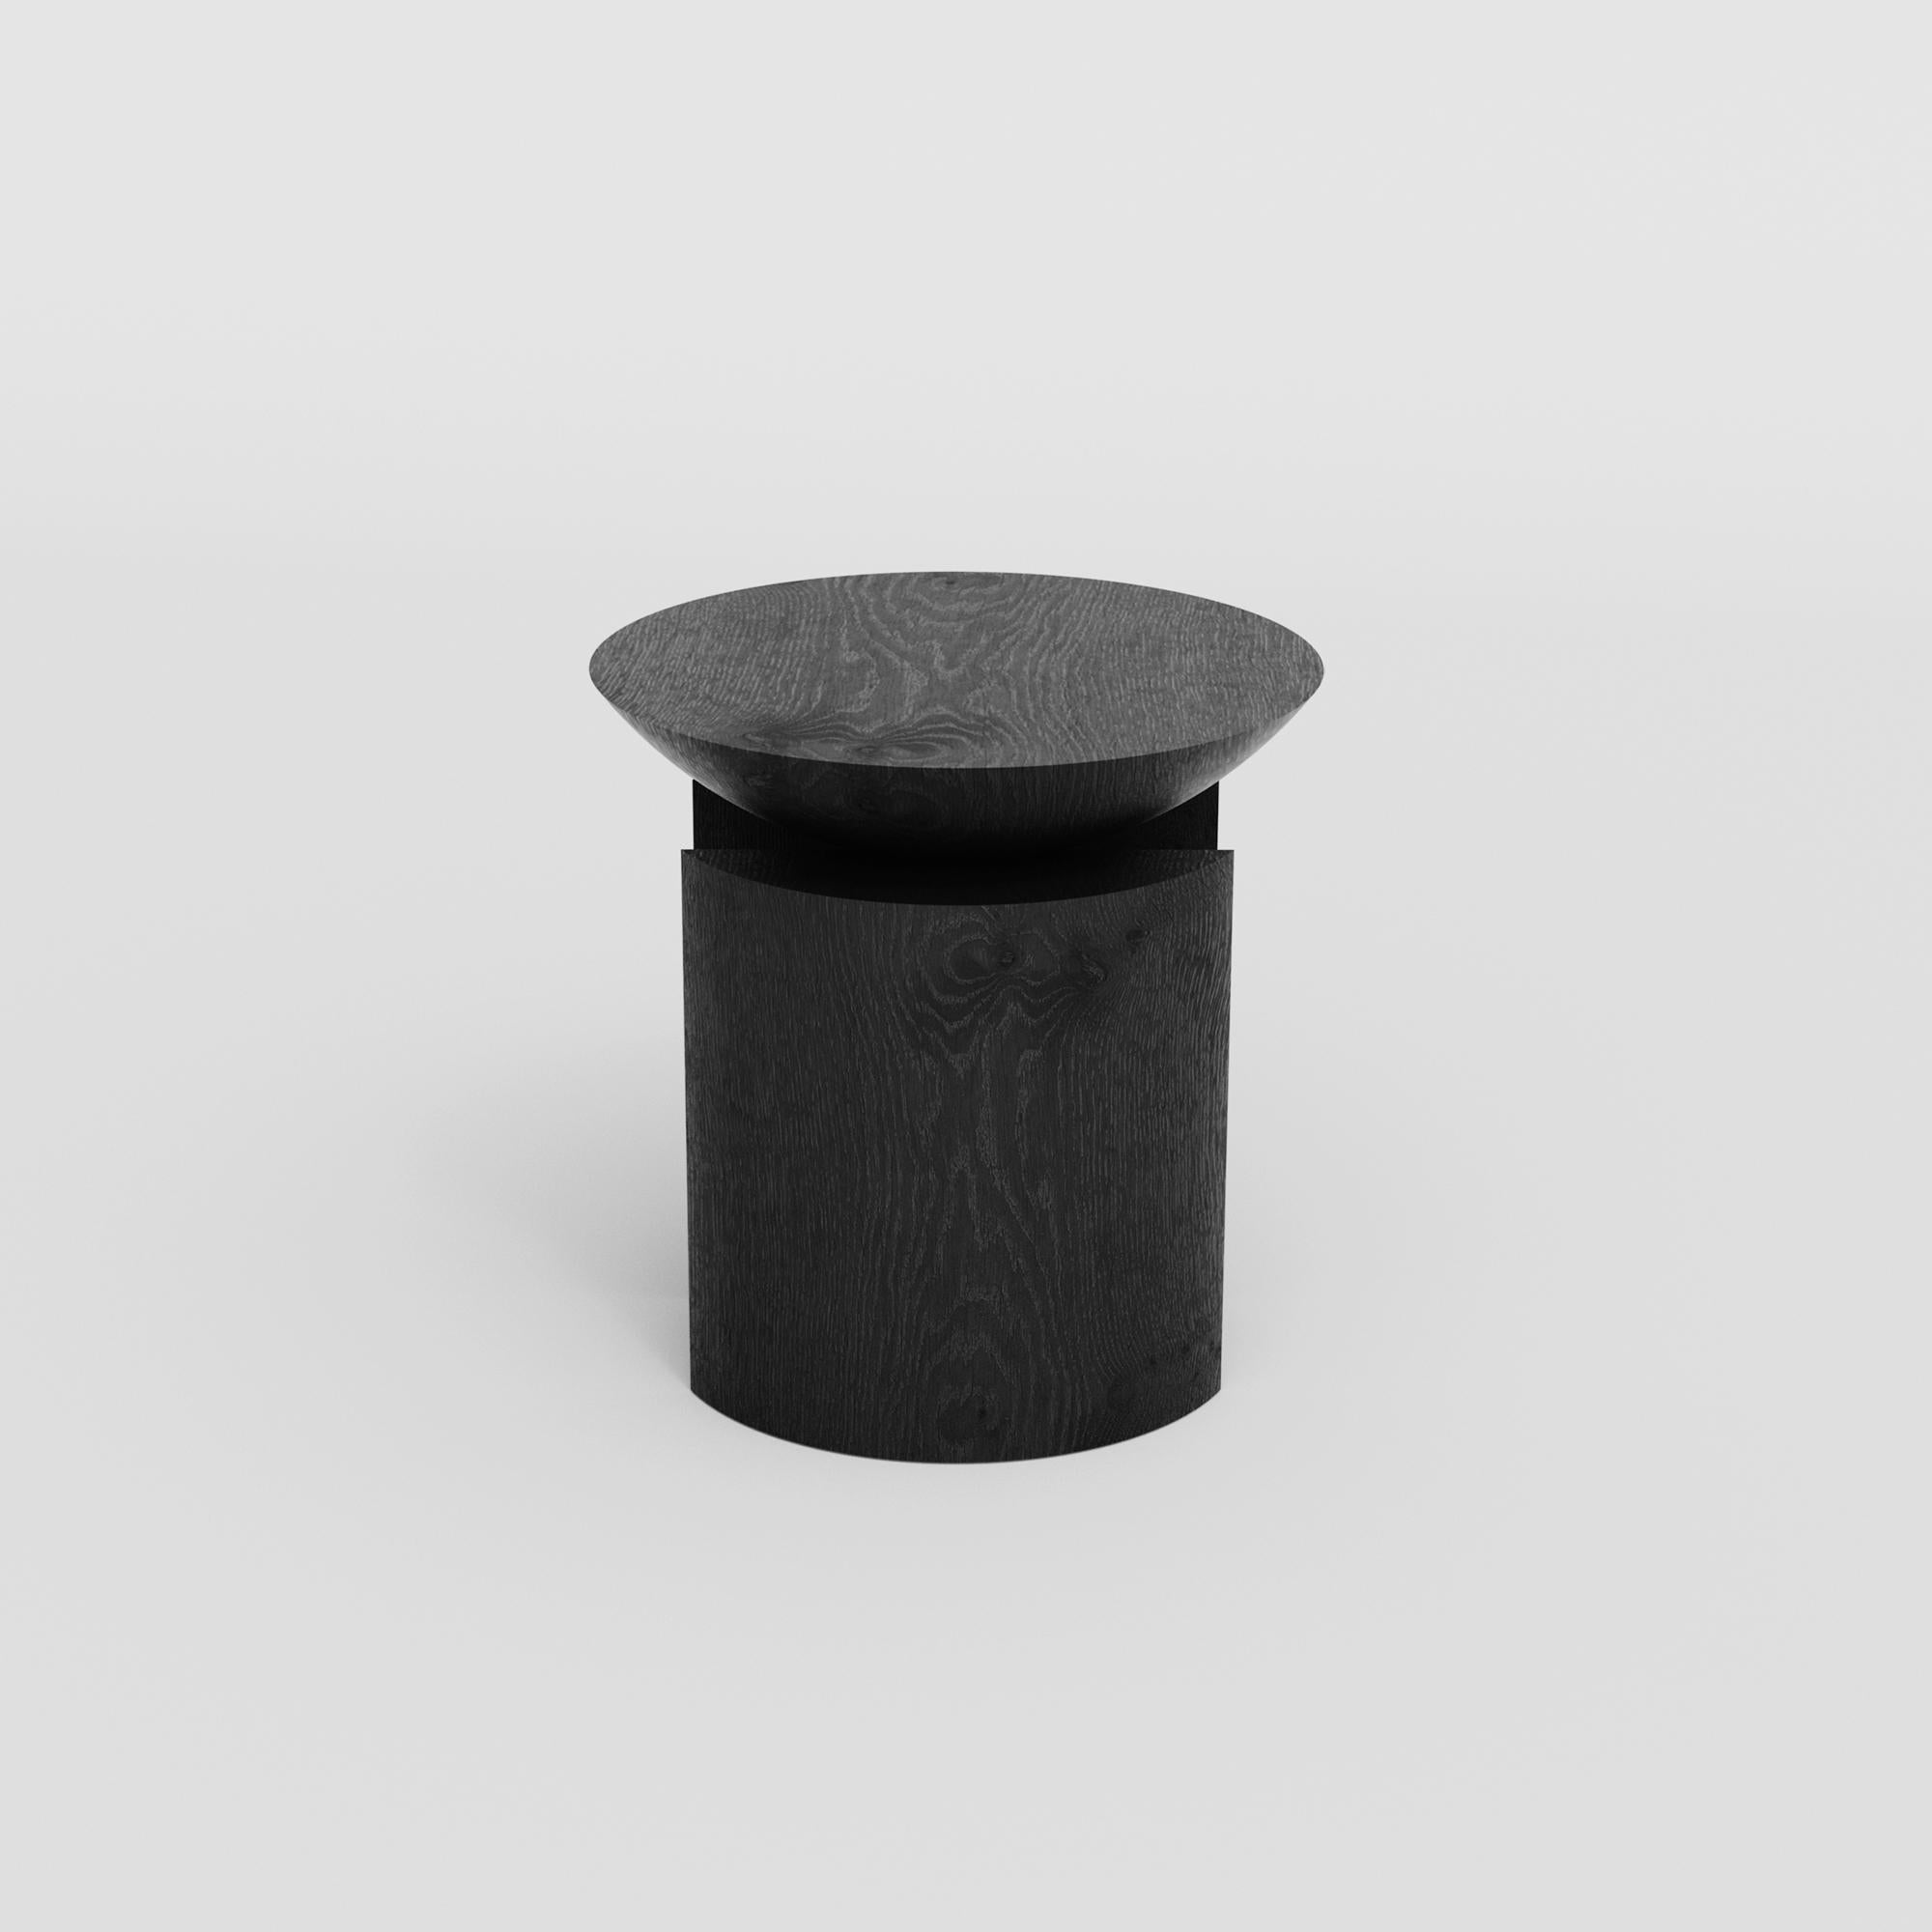 Minimalist Anca Sculptural Side Table or Stool in Tropical Hardwood by Pedro Paulo Venzon